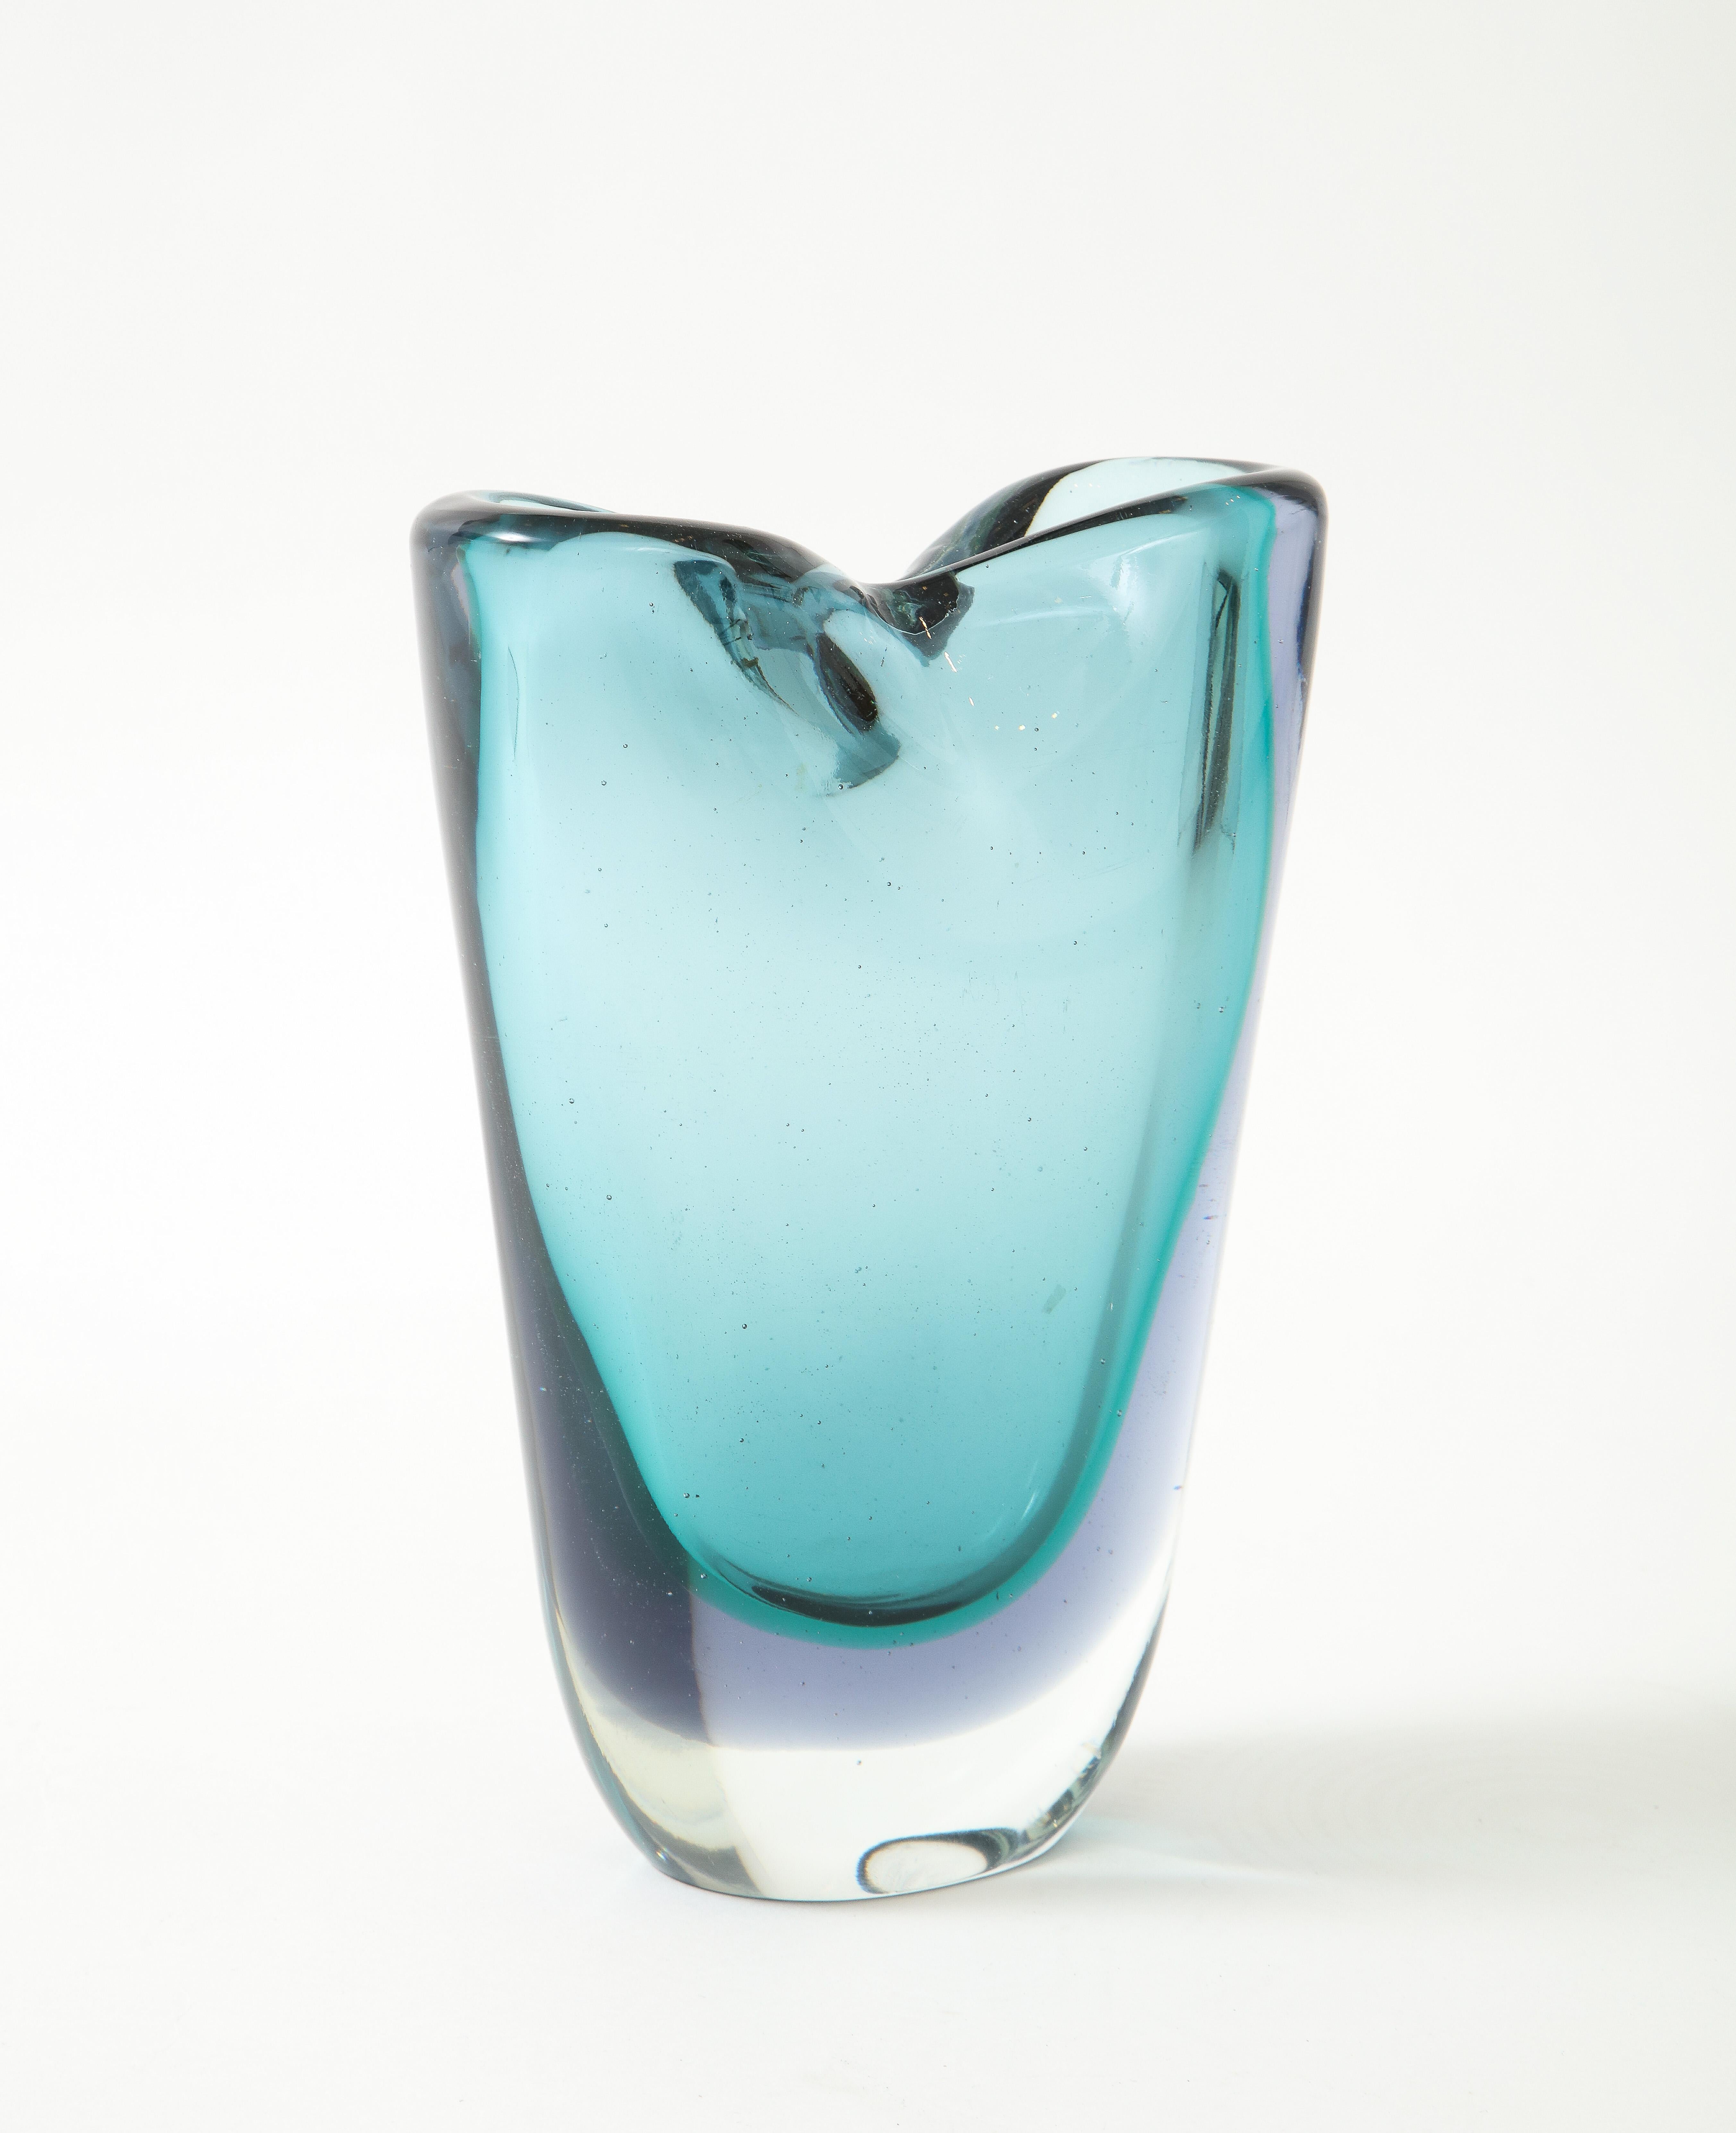 Flavio Poli for Seguso Vetri d'Arte exquisite pinched glass vase, Italy, 1950s. This Murano blown glass vase was made using the Sommerso technique in a subtle beautiful shade of aqua and blue gray. Although unsigned, it's documented in the Seguso